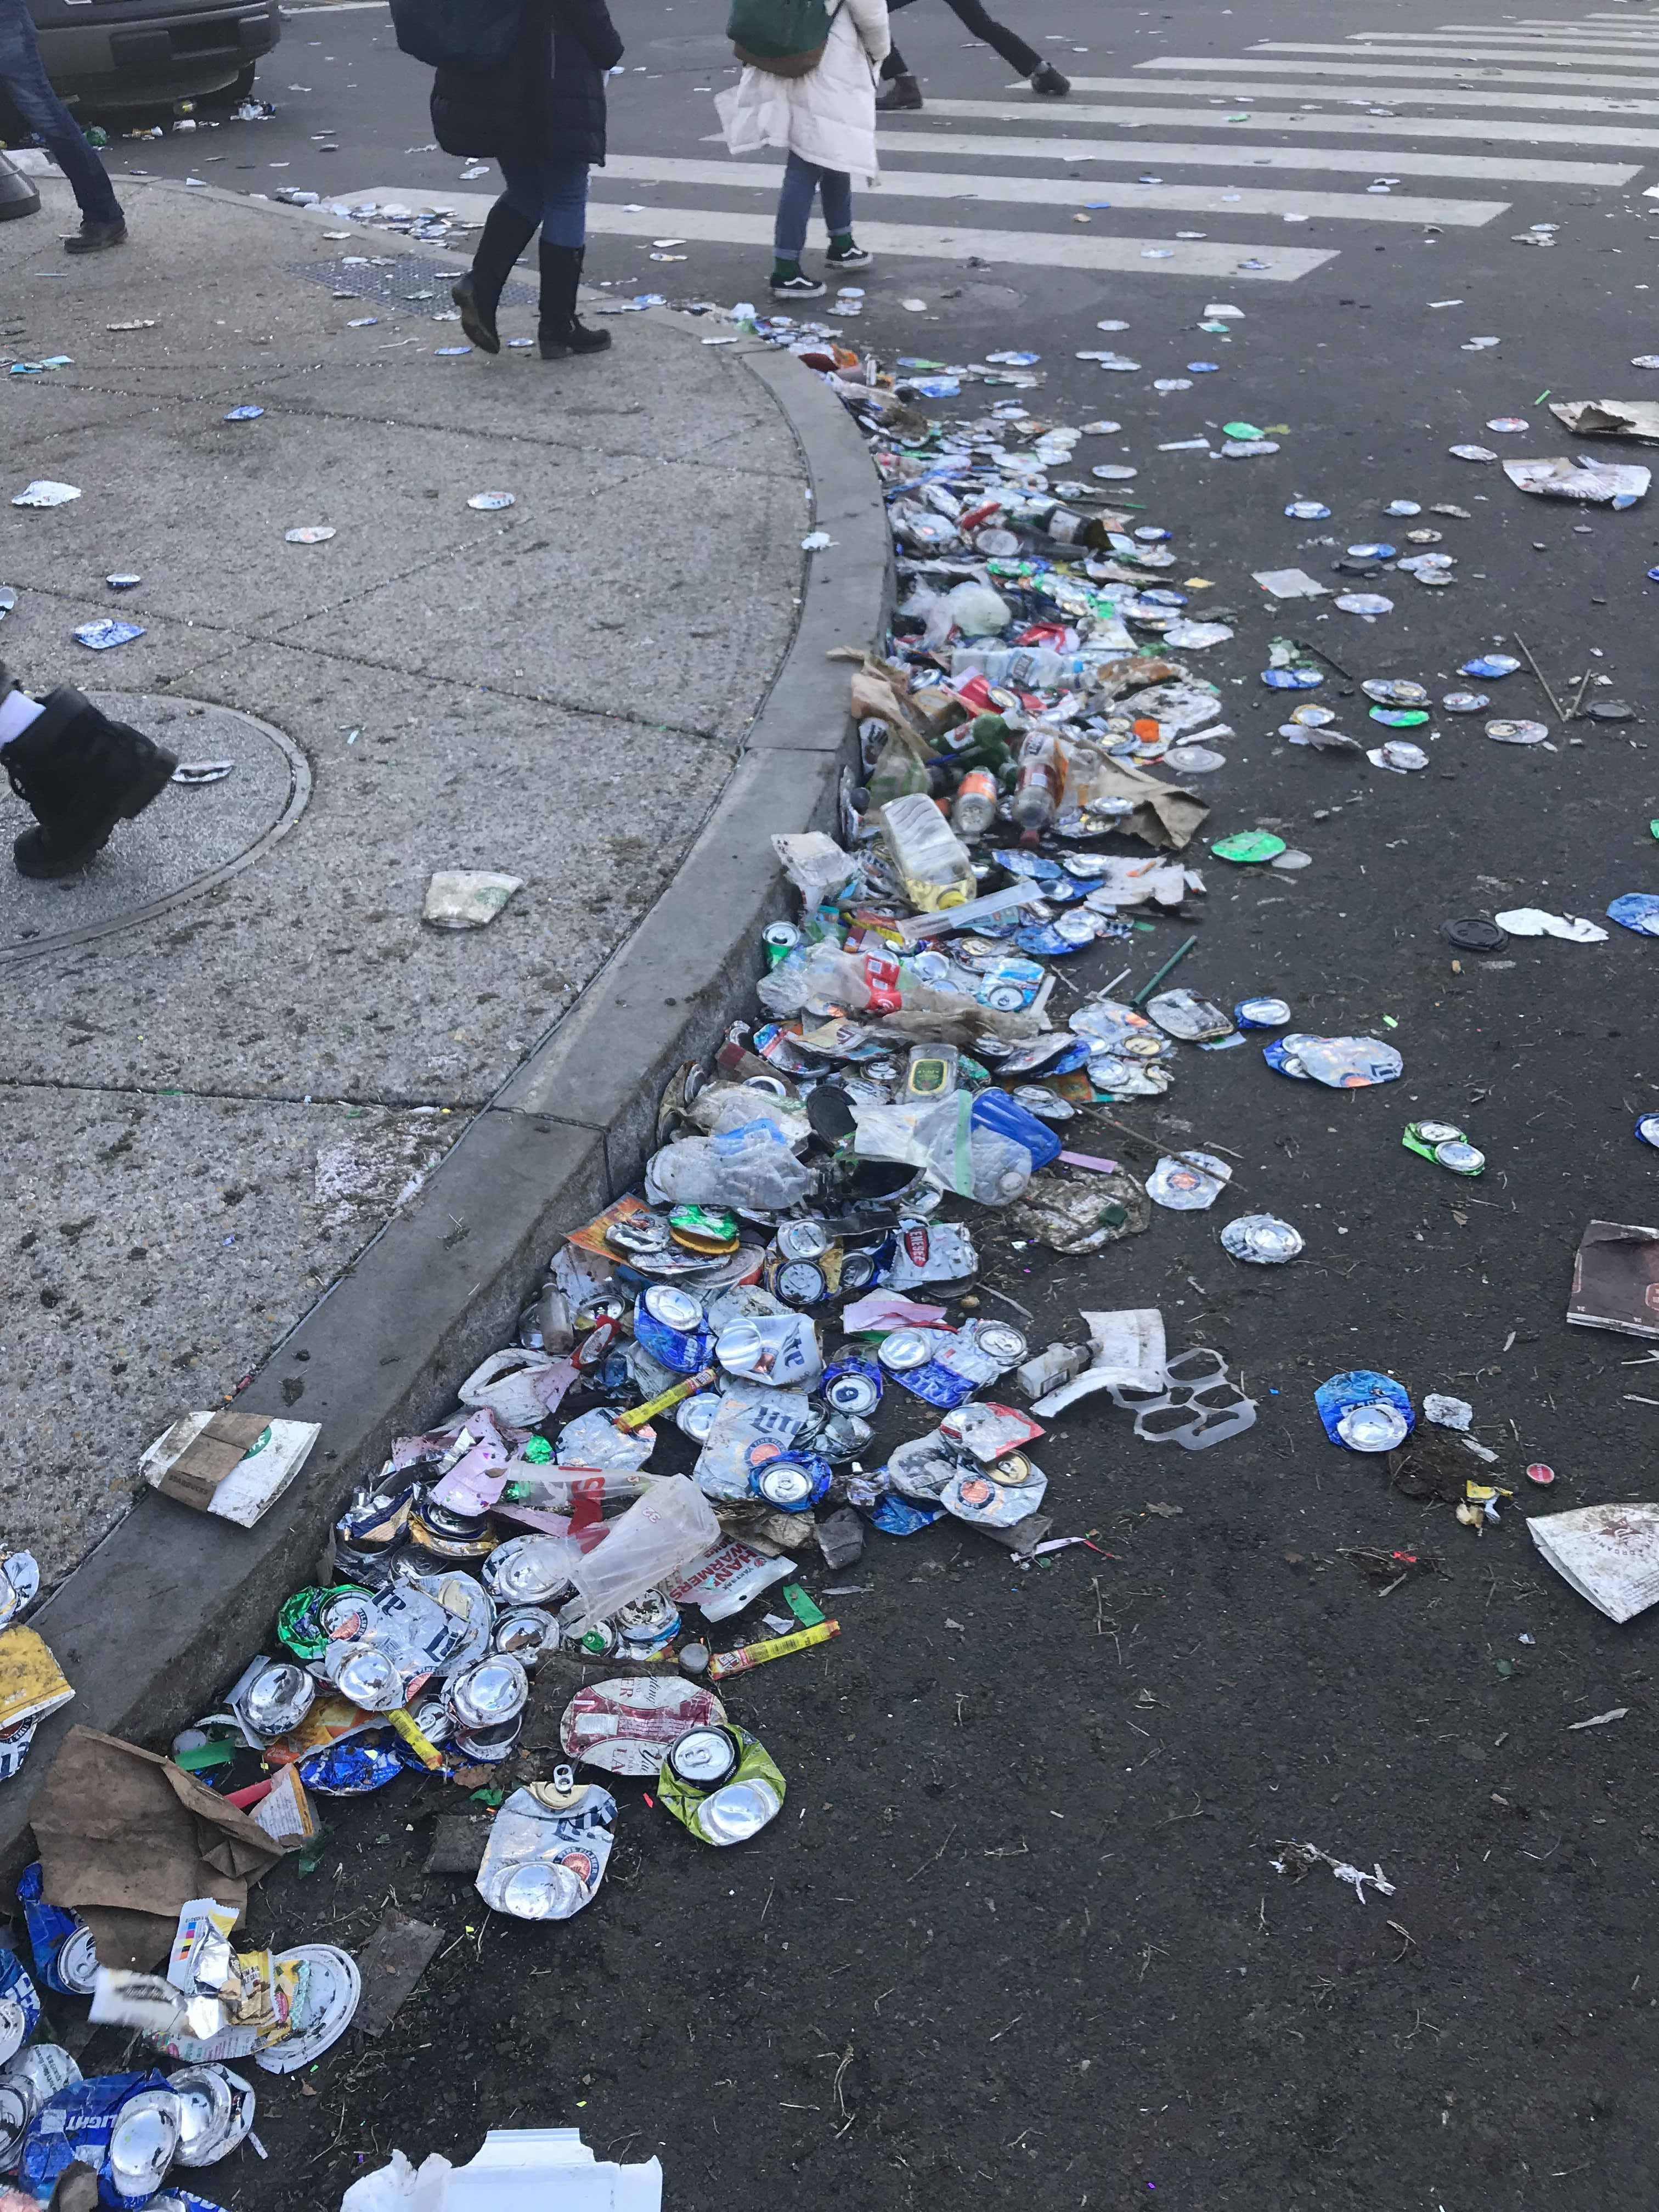 Discarded cans crushed by the crowd in the Aftermath of the Eagles Parade. Credit: Tom Gannon/Nick's Roast Beef 